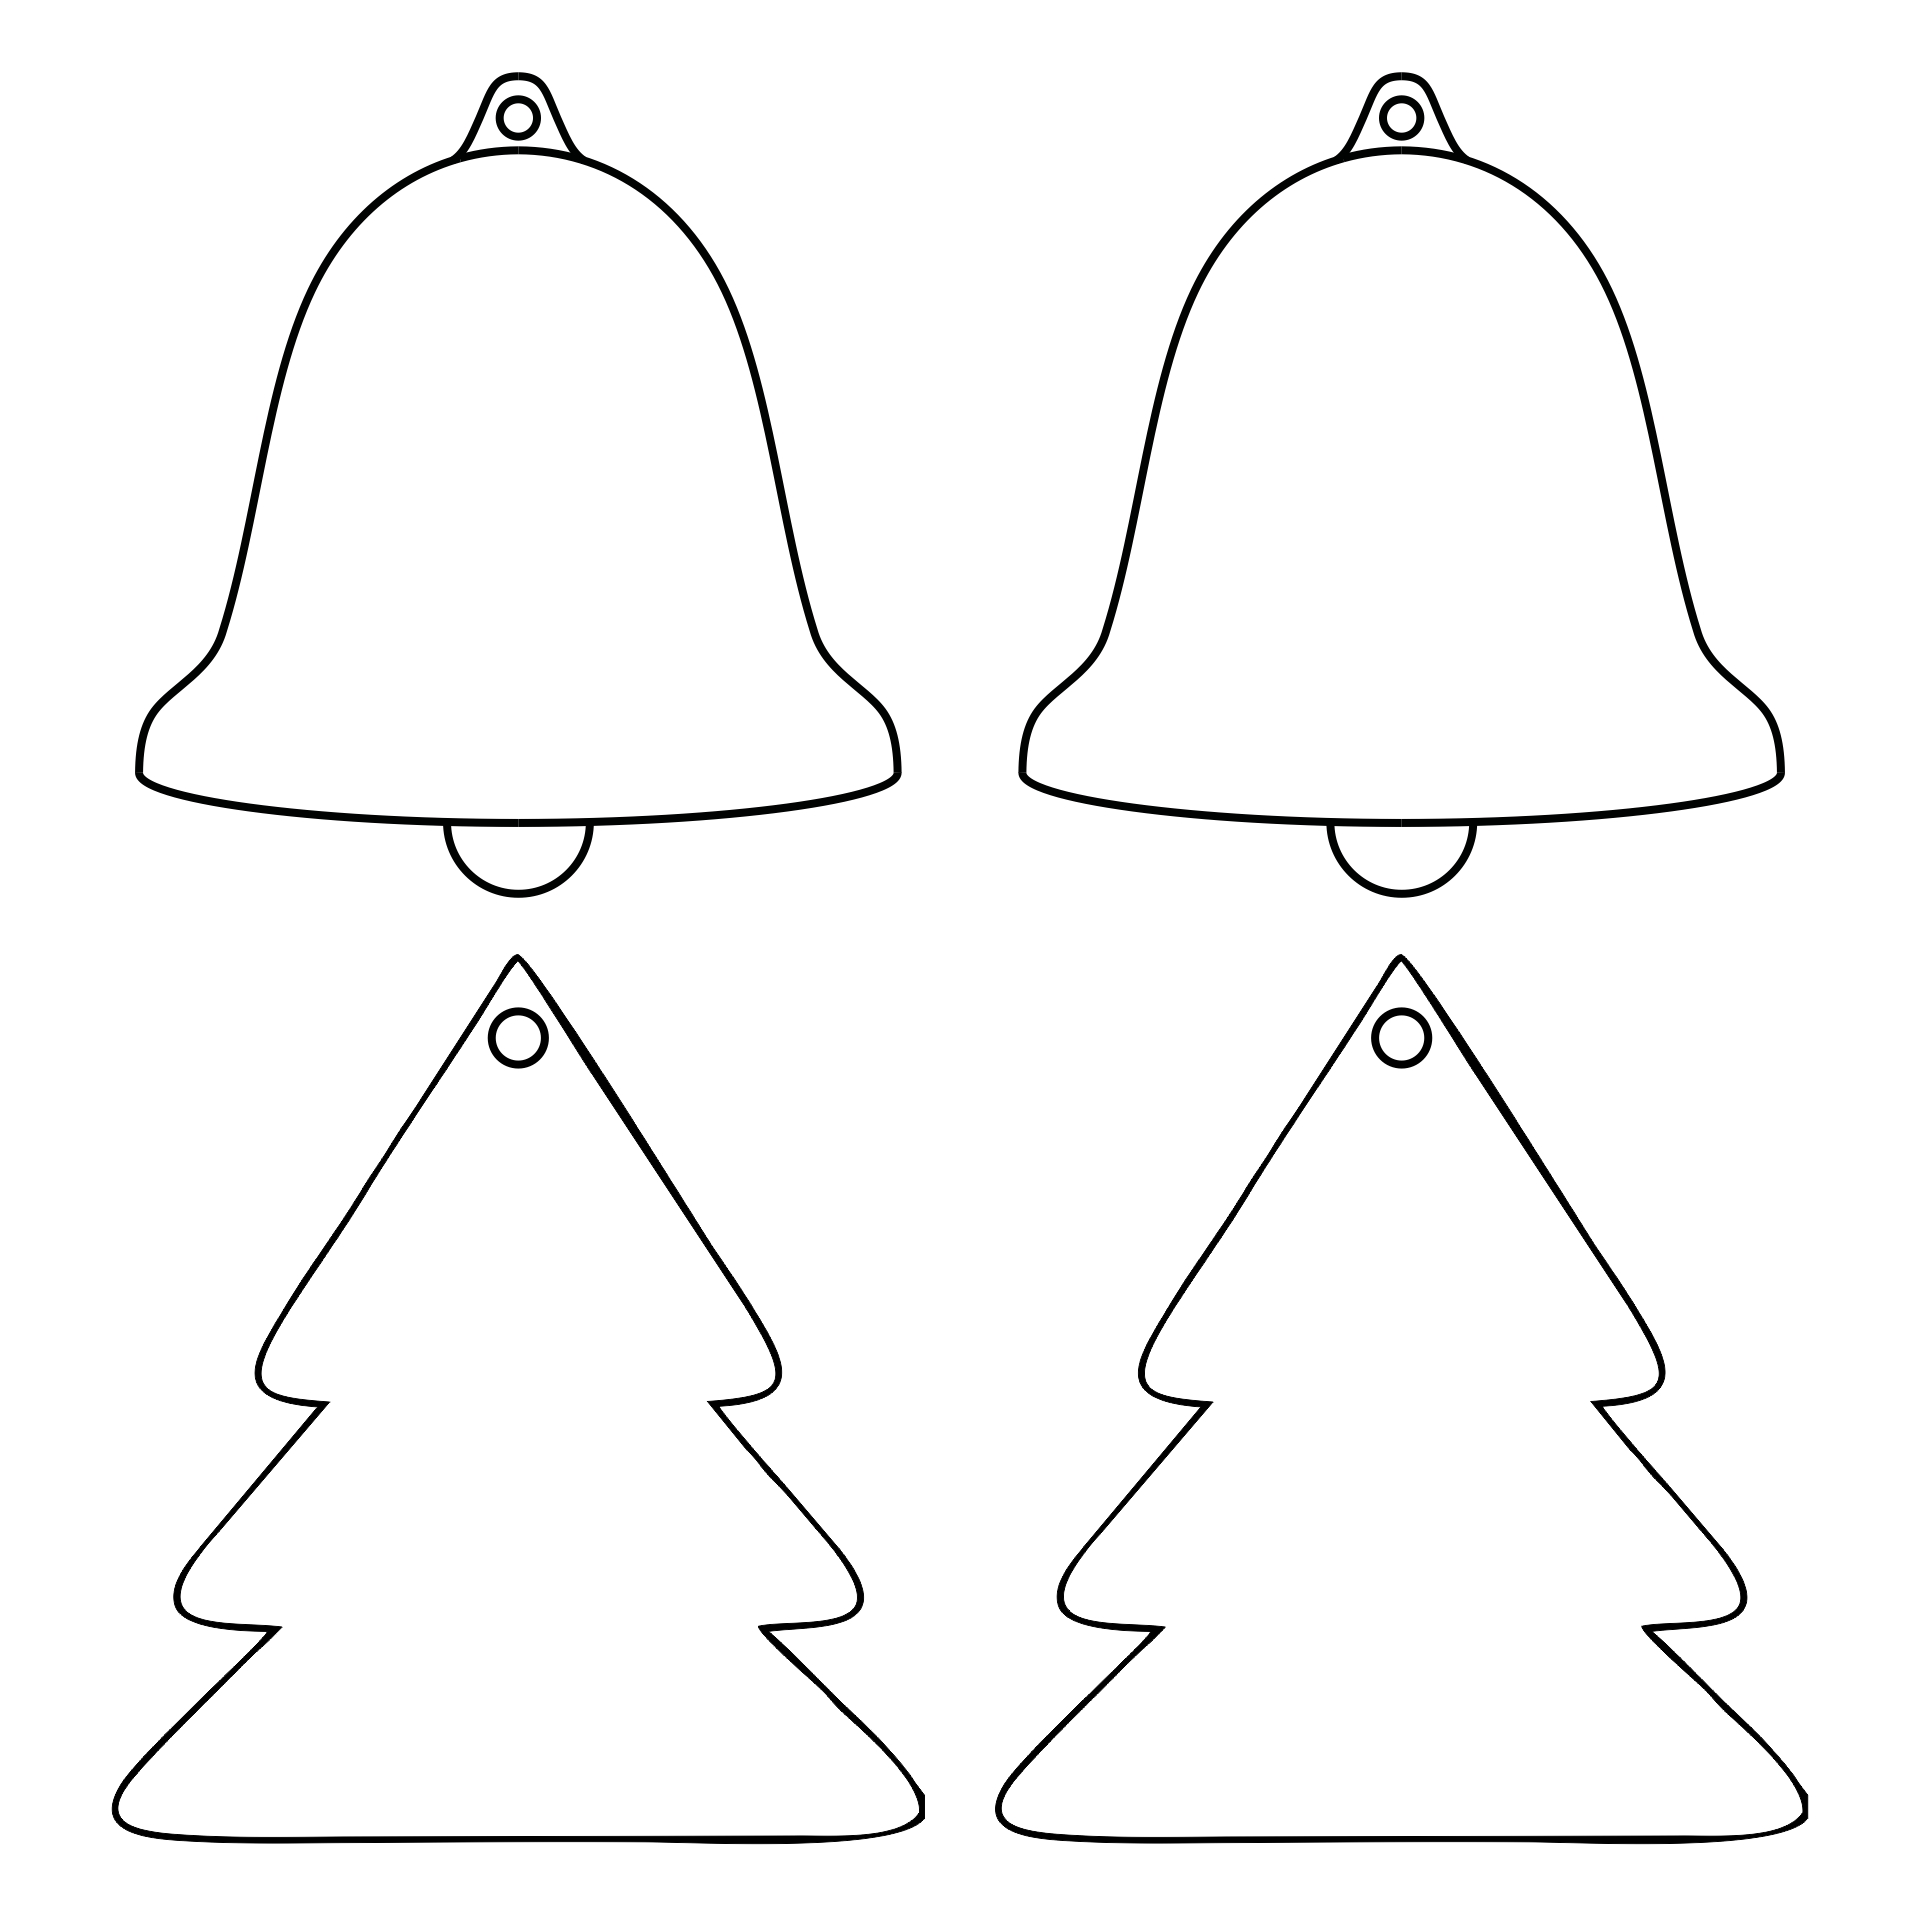 7 Best Images of Free Printable Christmas Ornament Shapes - Christmas ...